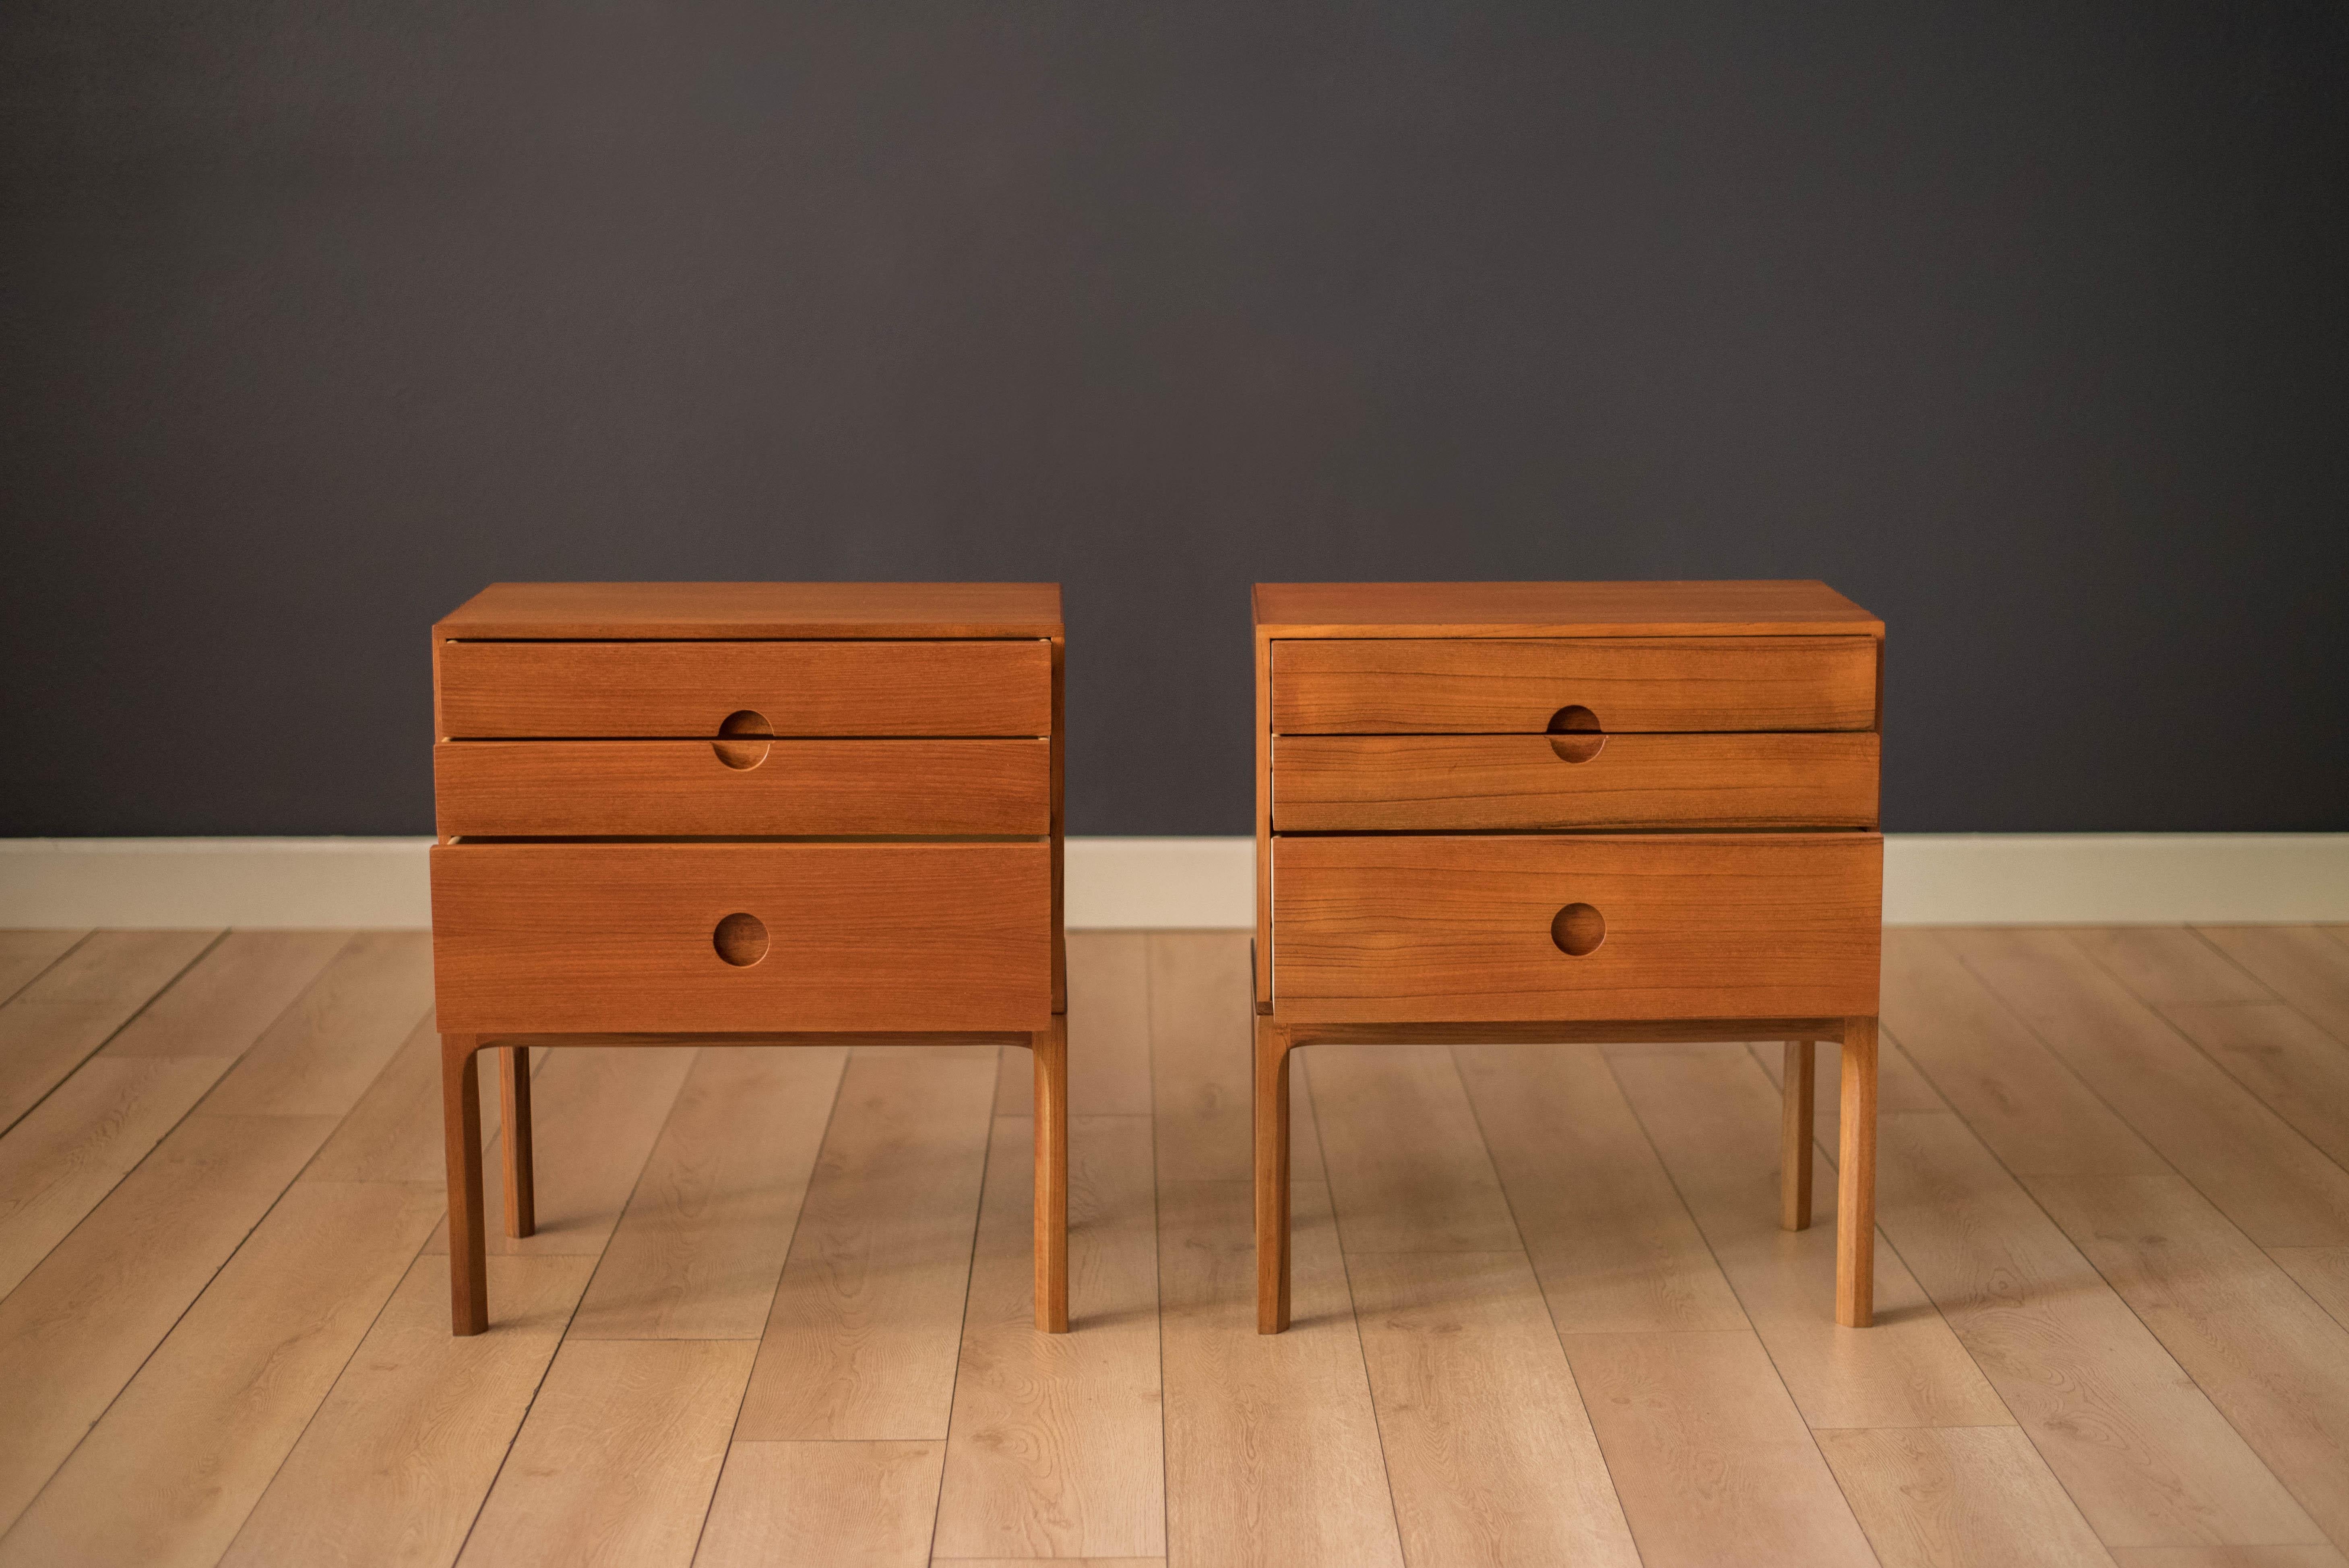 Mid-Century Modern matching pair of teak bedside tables designed by Kai Kristiansen for Aksel Kjersgaard, Denmark. This set features sleek circular recessed pulls that open three dovetail storage drawers. Each case is designed with quality